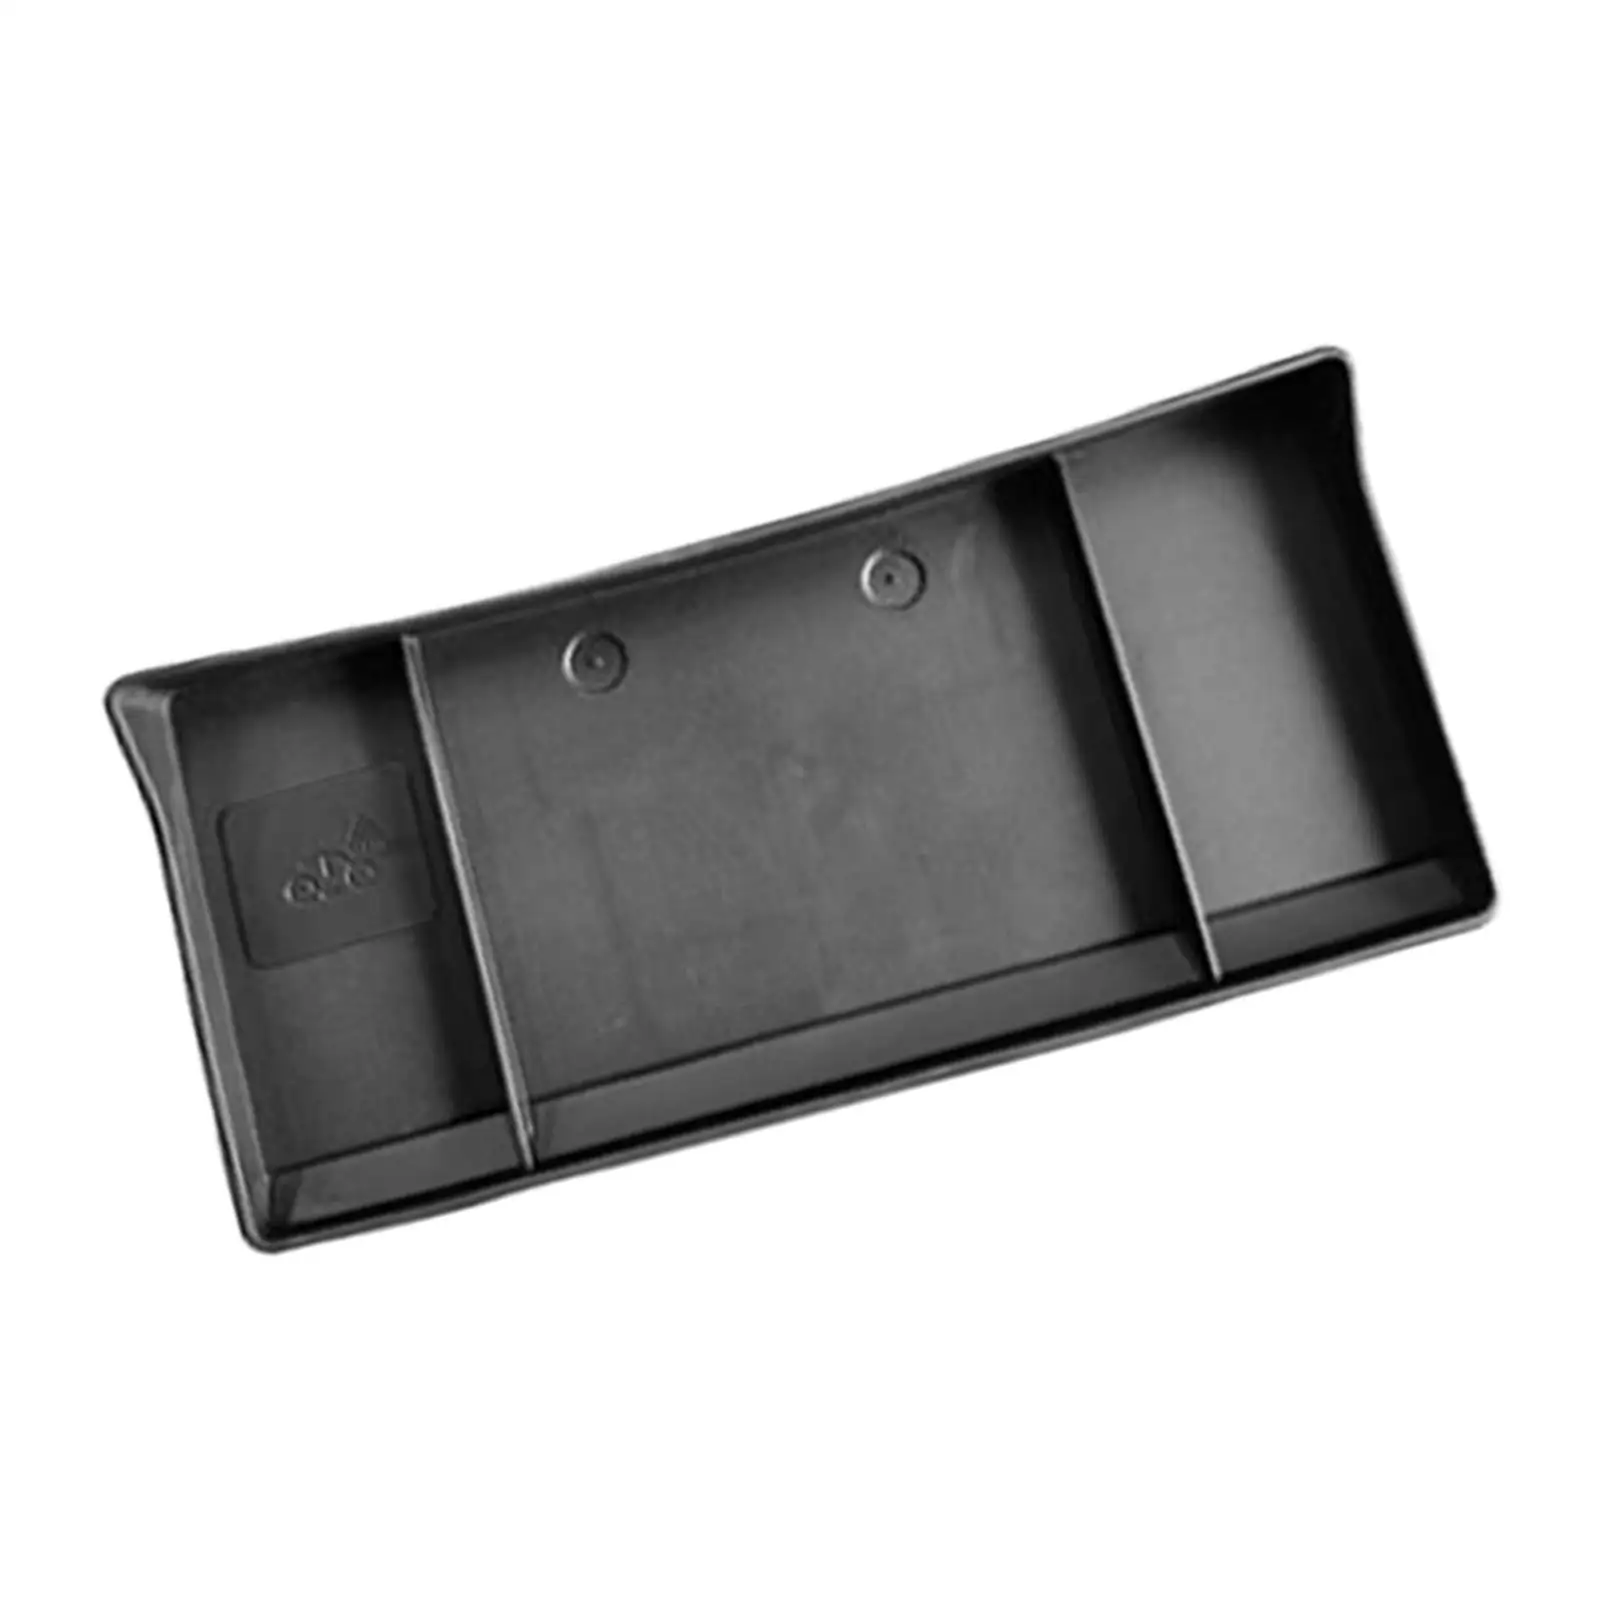 Center Screen Console Tray Organizer Behind Screen Storage Tray for  Y Easy to Install Spare Parts Accessories